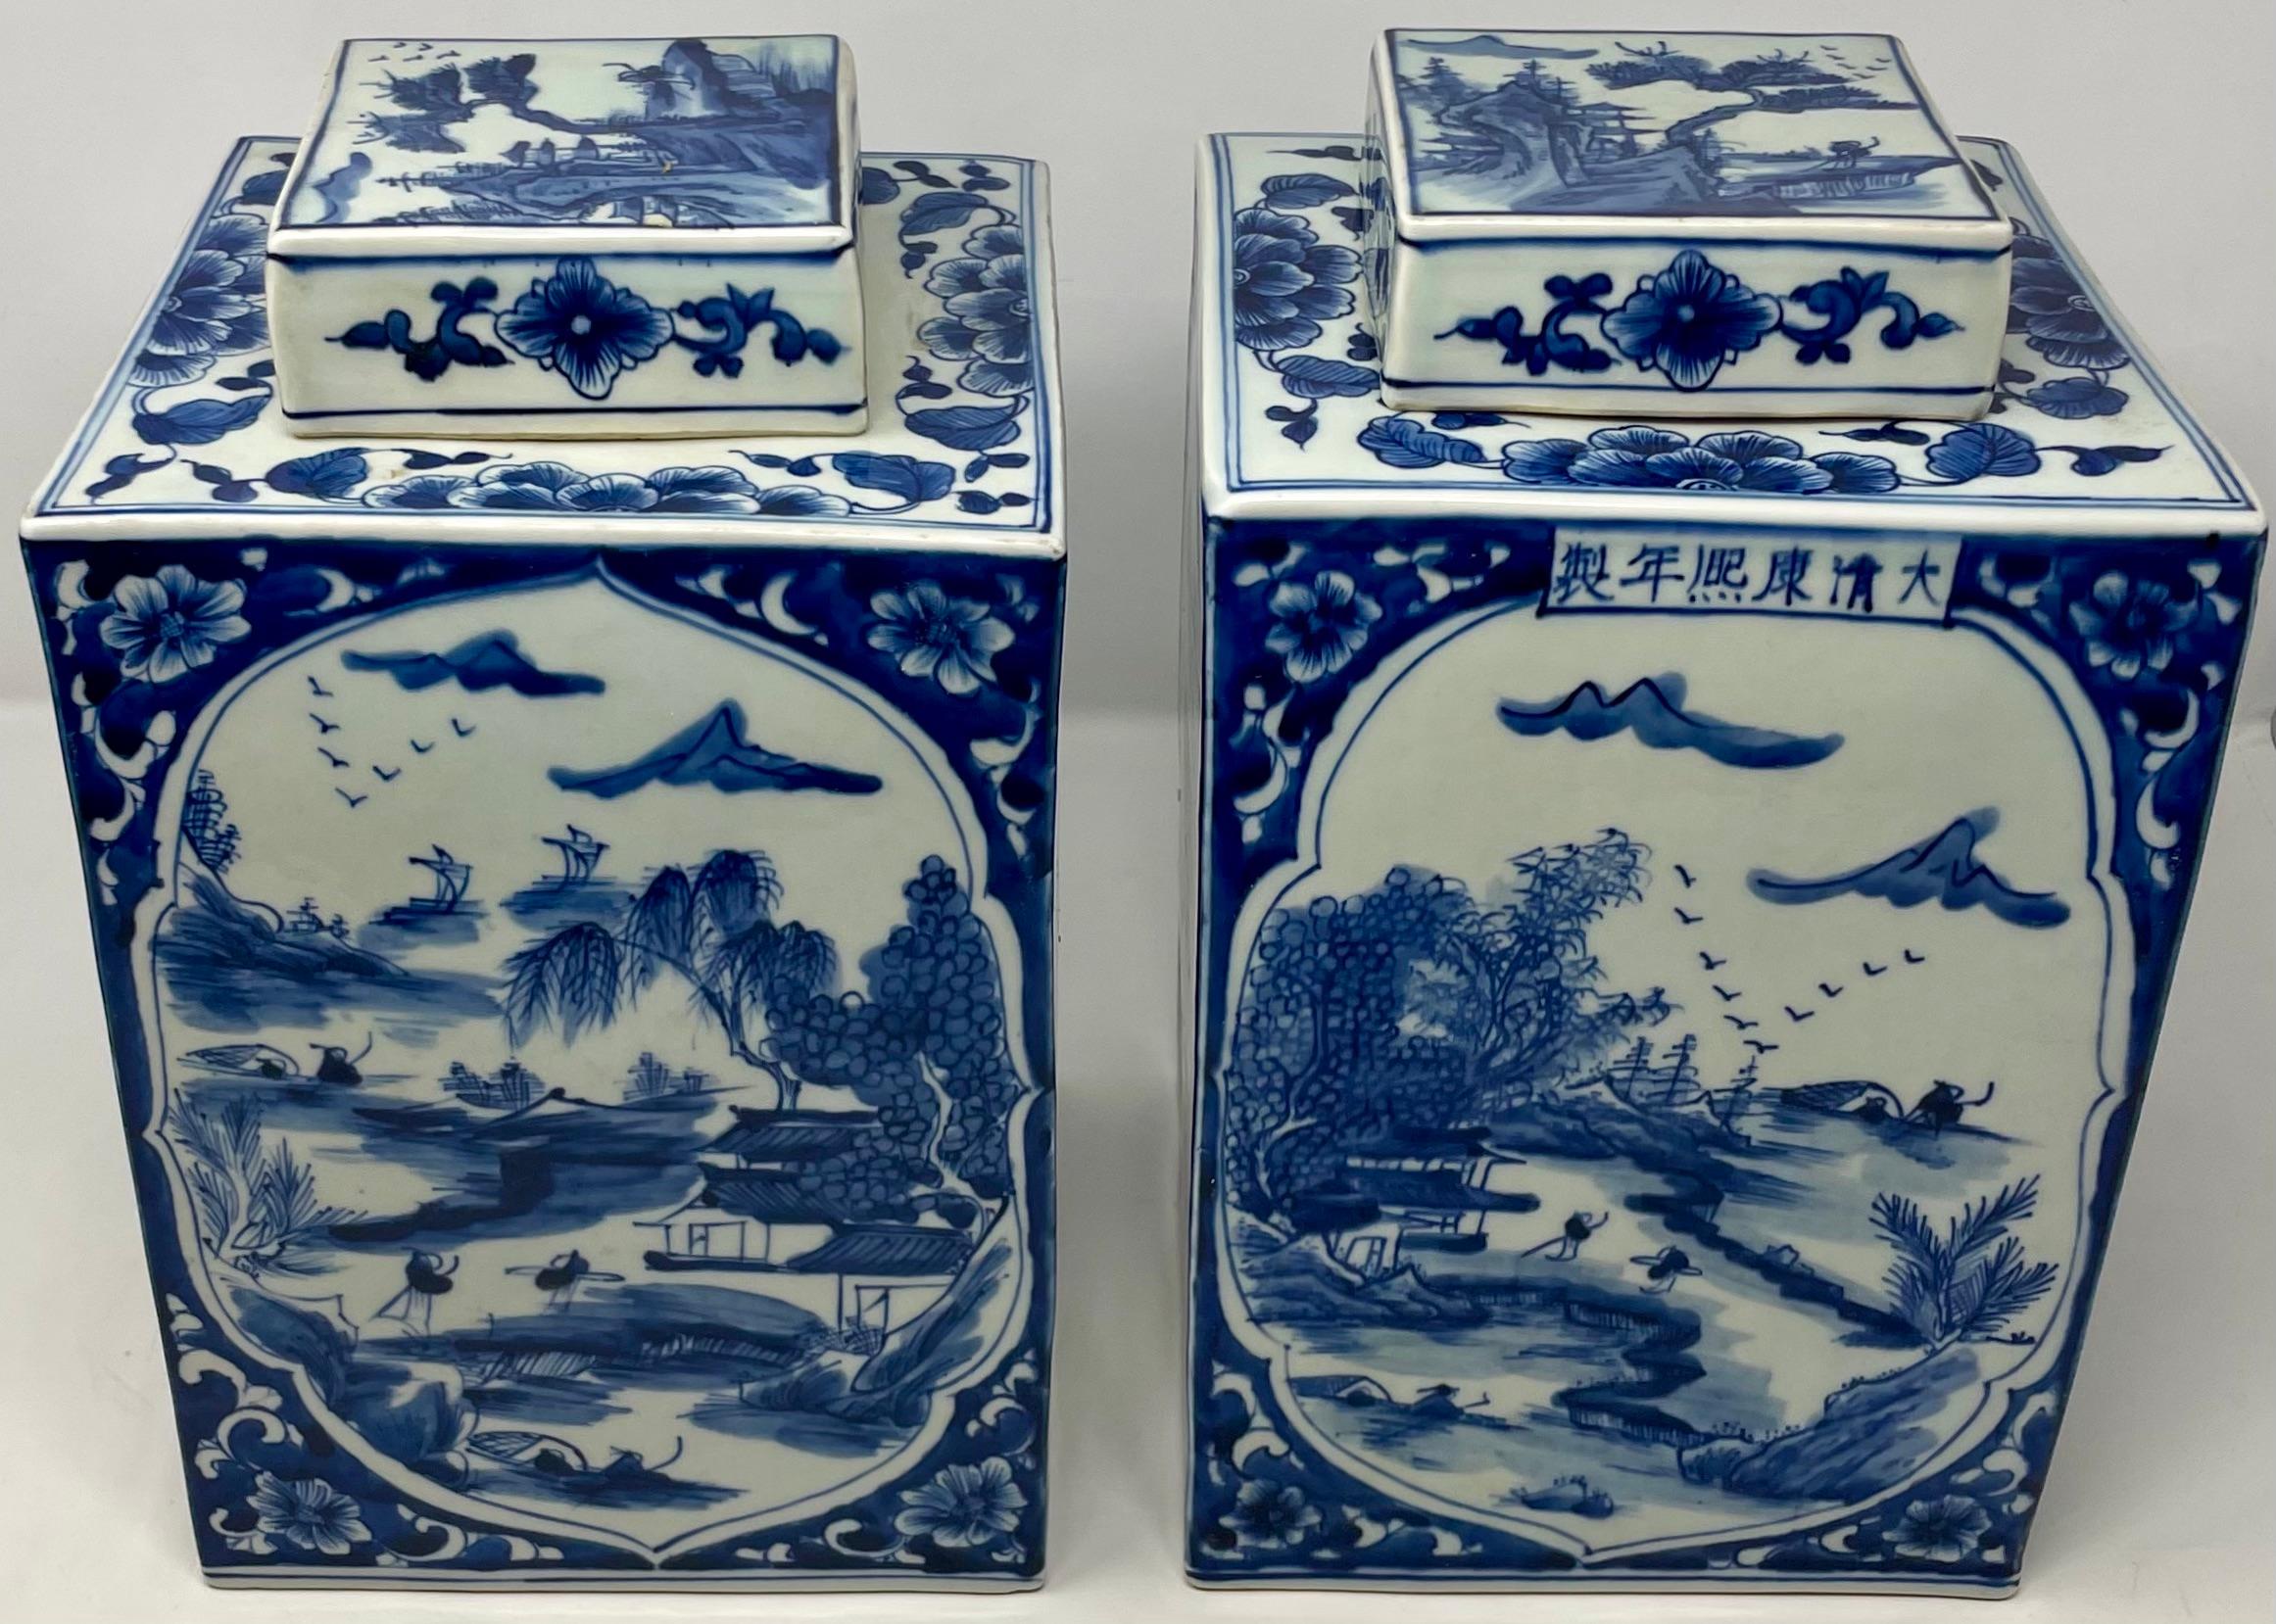 Pair of Large Estate Chinese blue and white porcelain tea jars, circa 1950's.